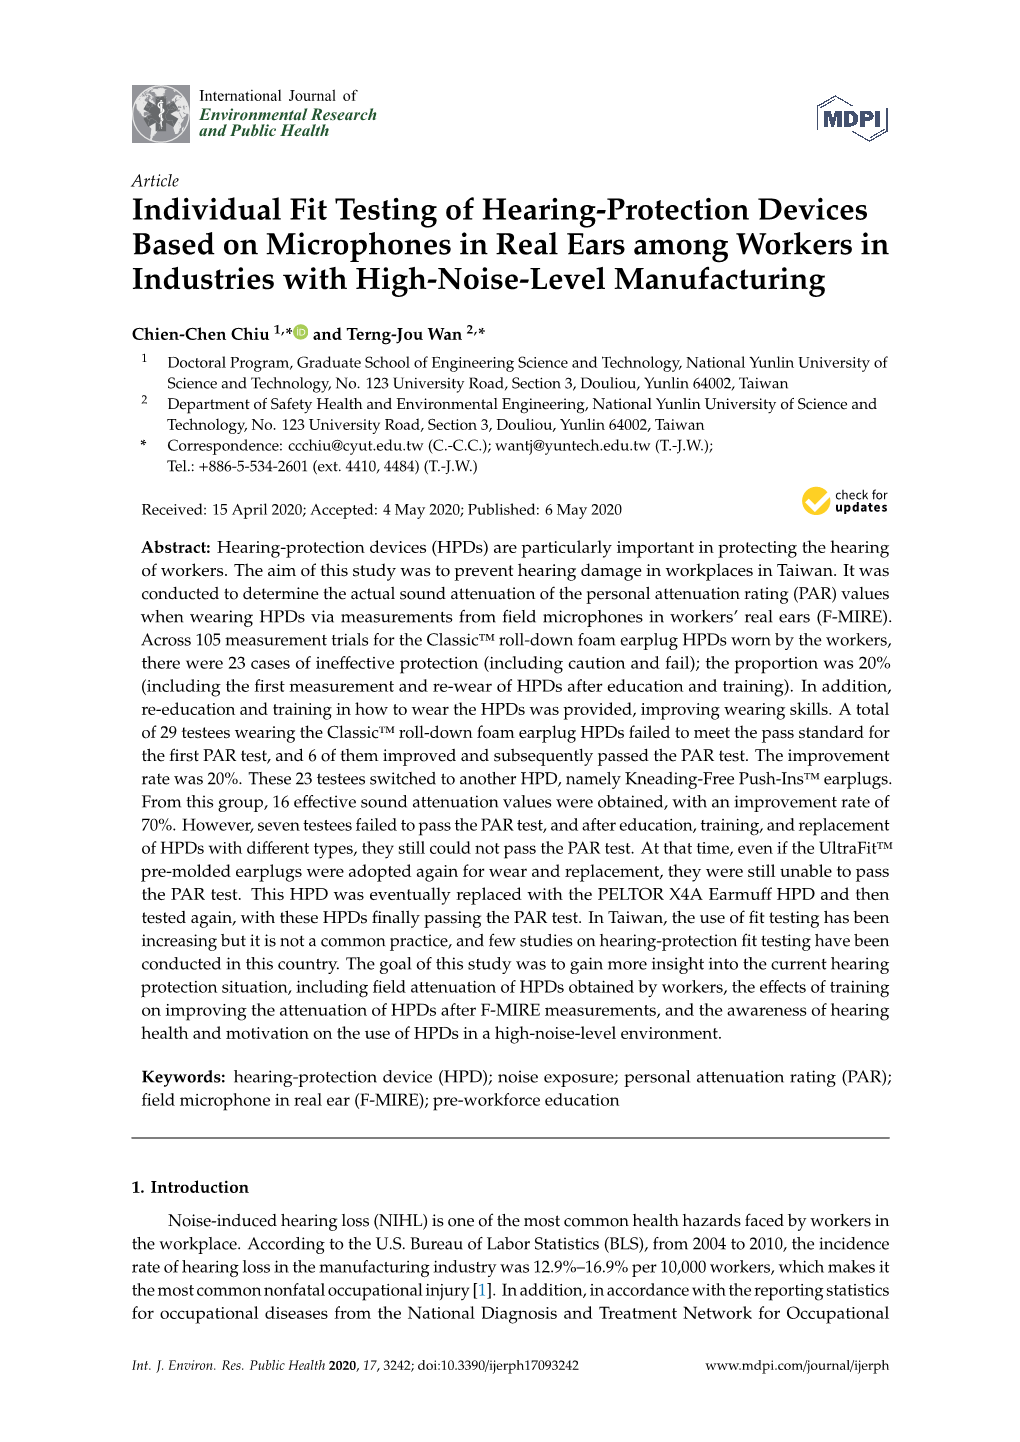 Individual Fit Testing of Hearing-Protection Devices Based on Microphones in Real Ears Among Workers in Industries with High-Noise-Level Manufacturing